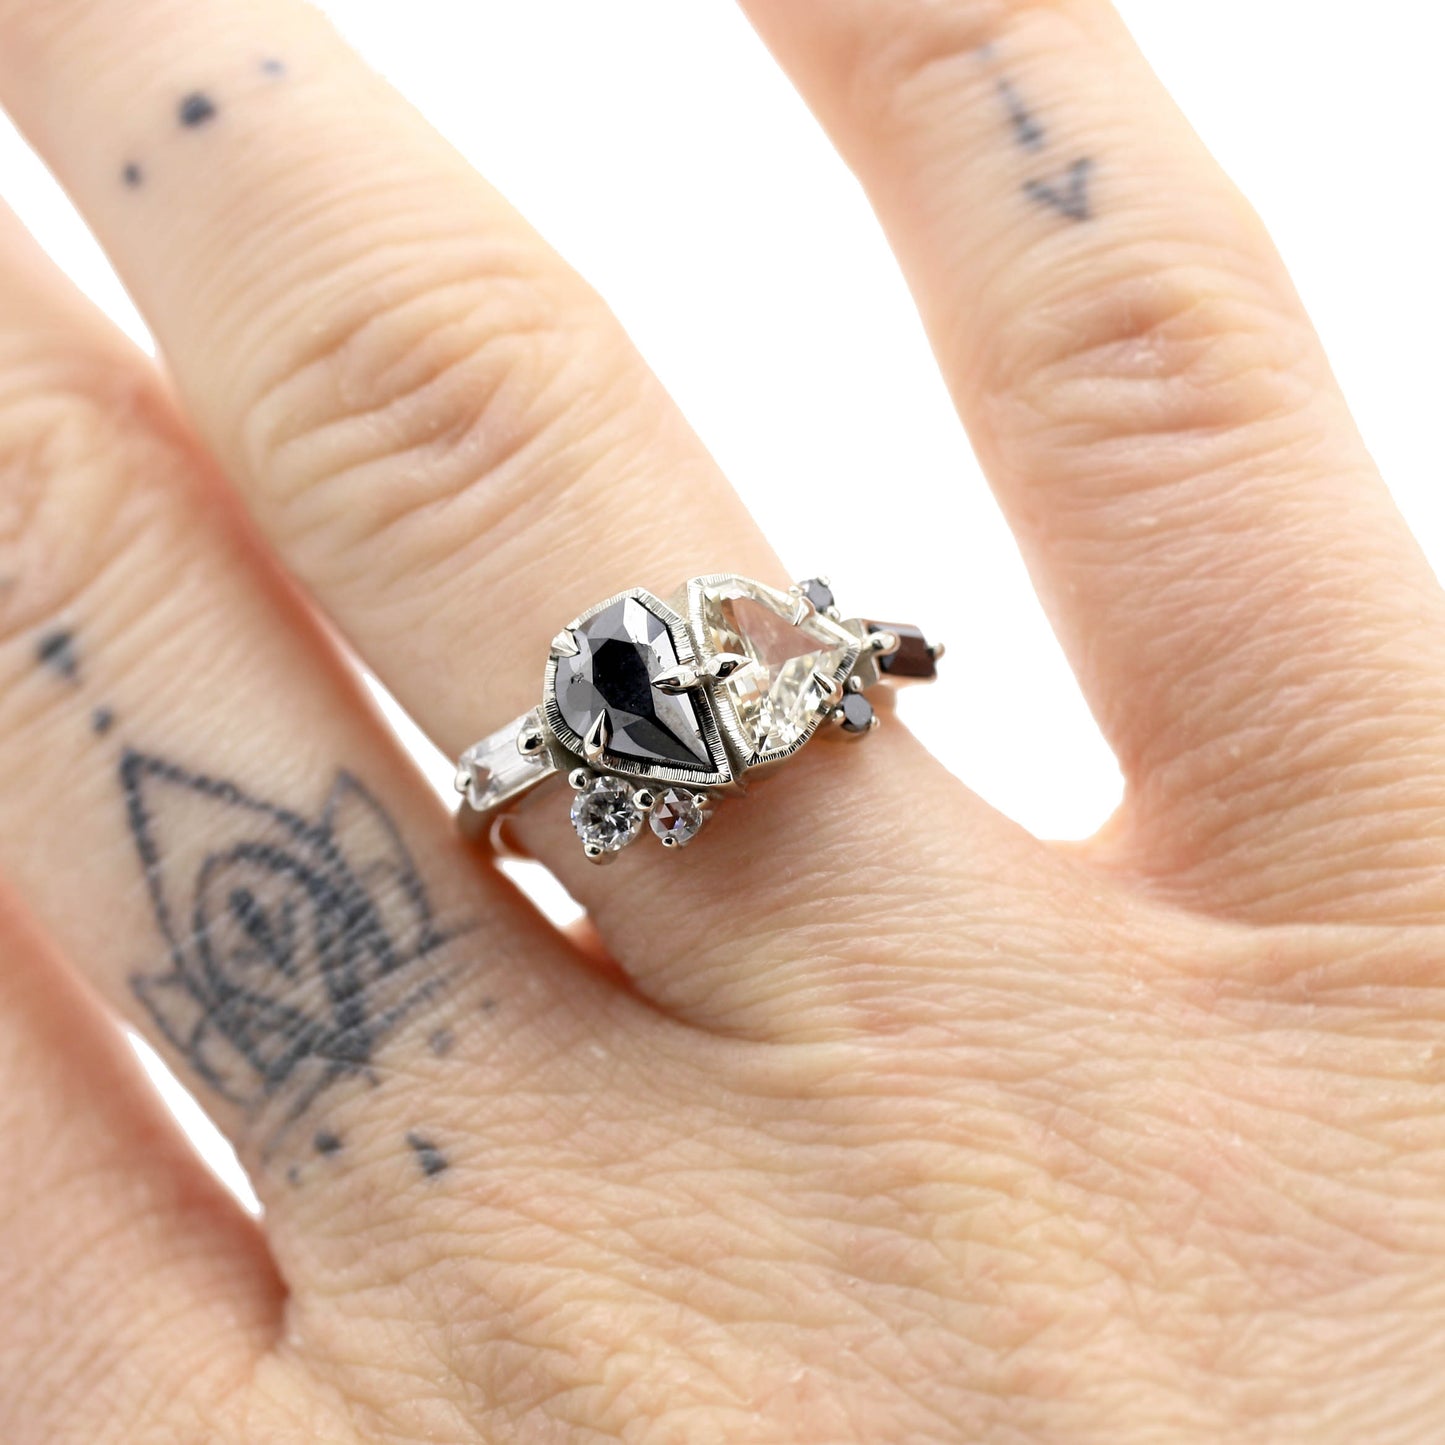 Asymmetric cluster ring with black and white diamonds, sapphires and gemstones on a hand